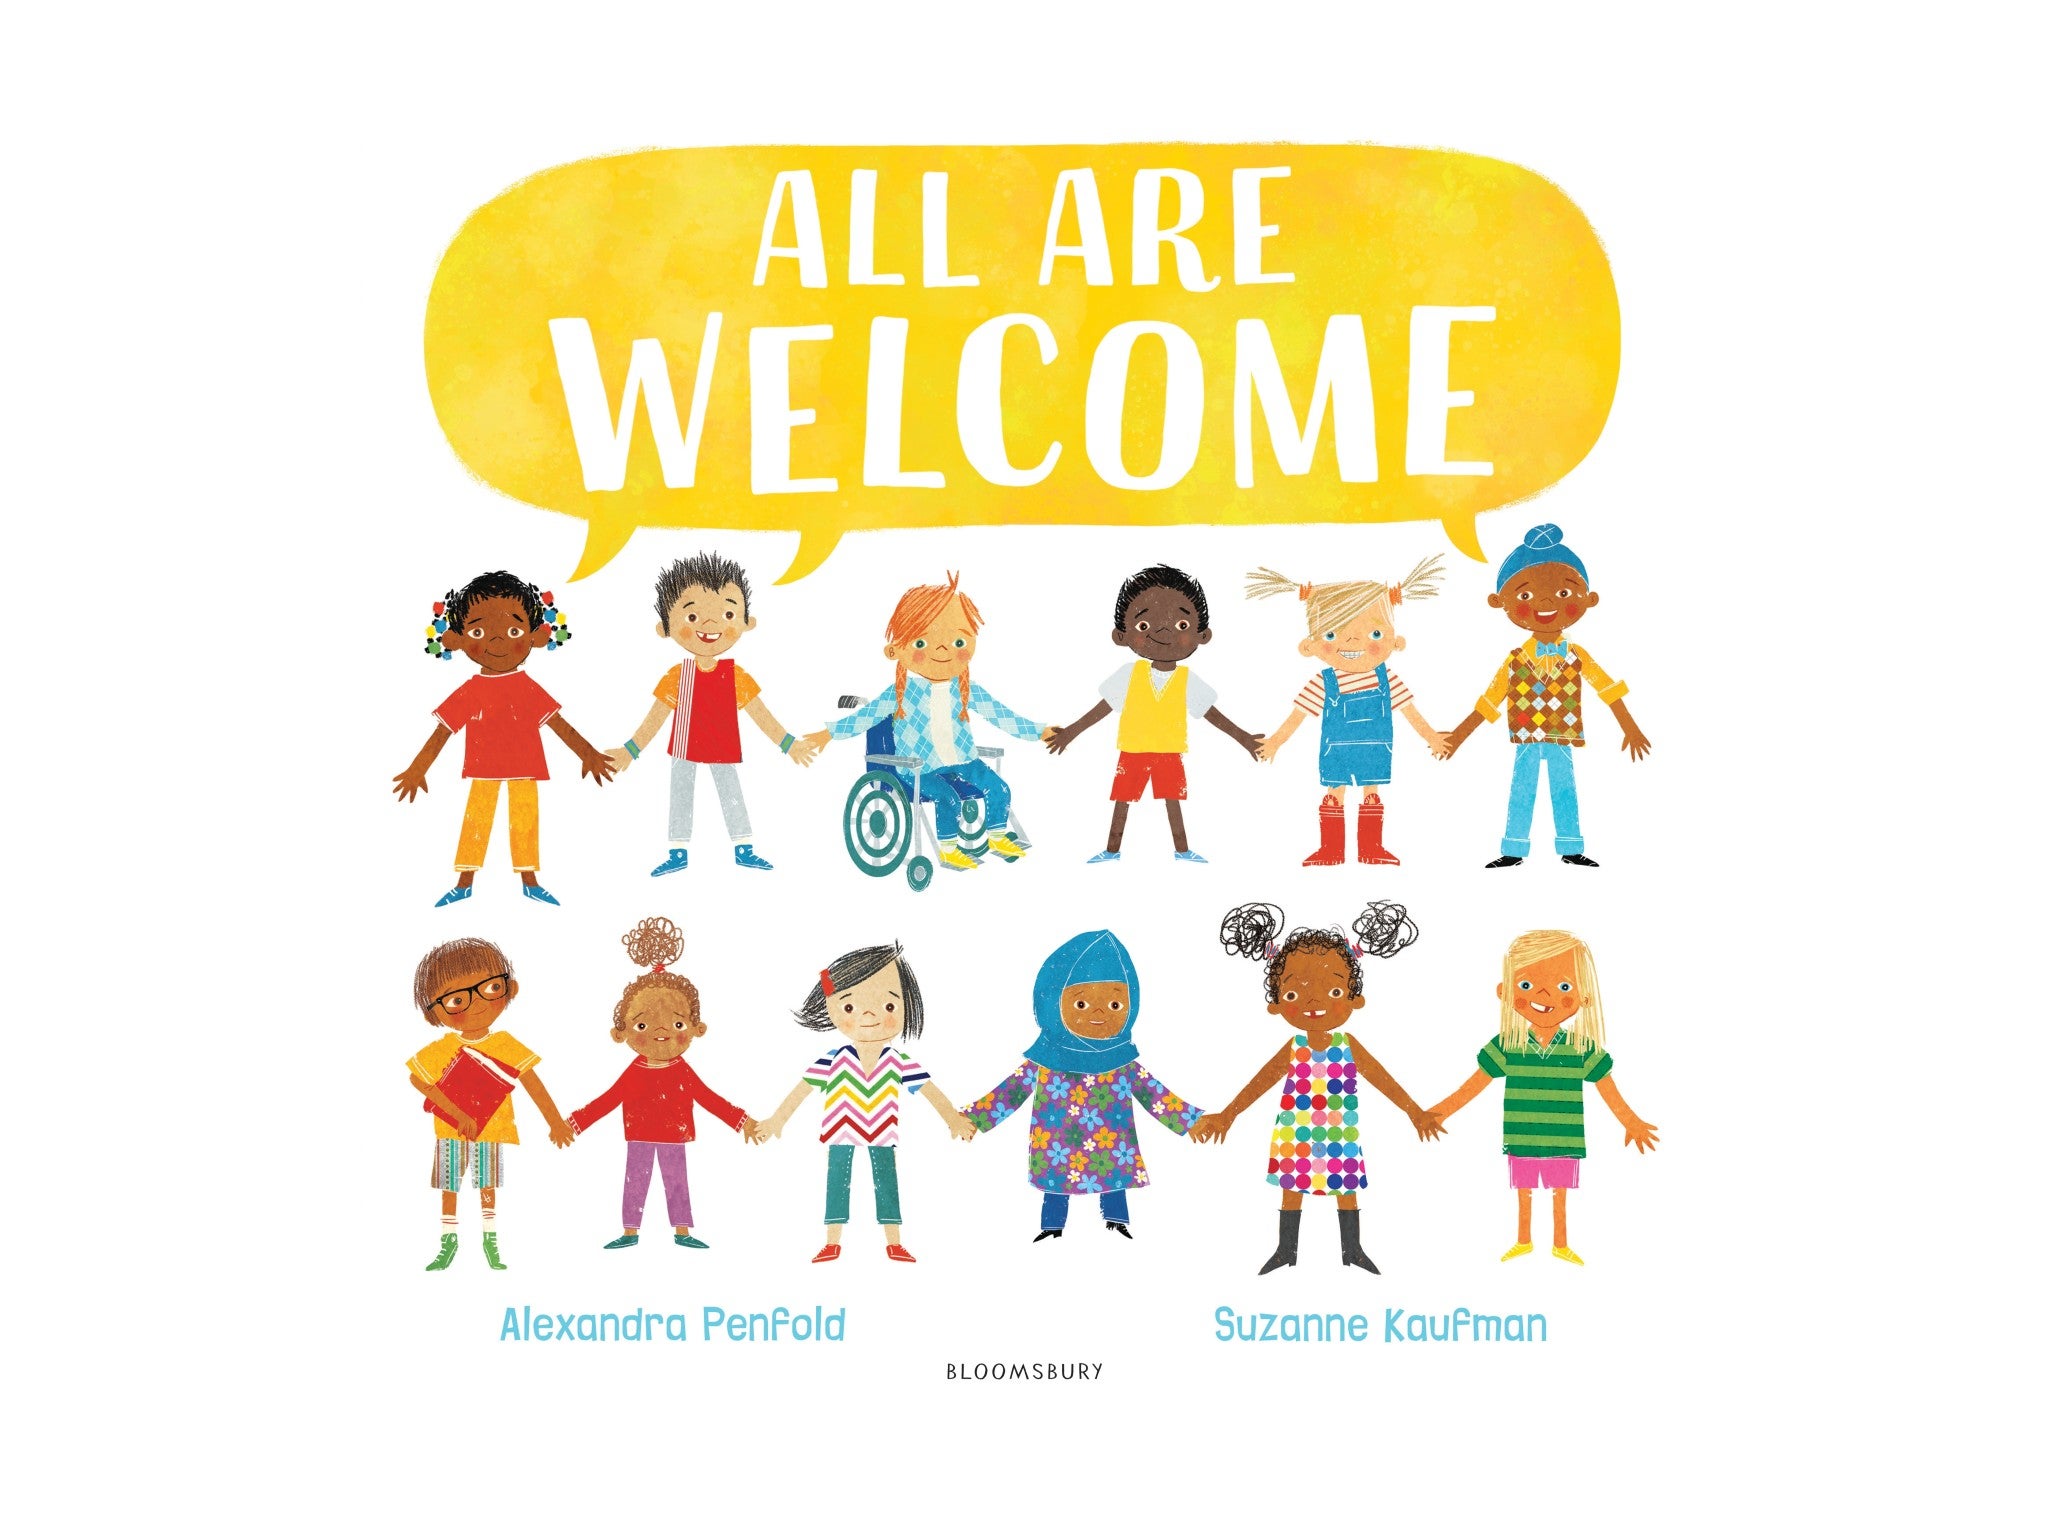 All Are Welcome, by Alexandra Penfold and Suzanne Kaufman, published by Bloomsbury indybest.jpeg